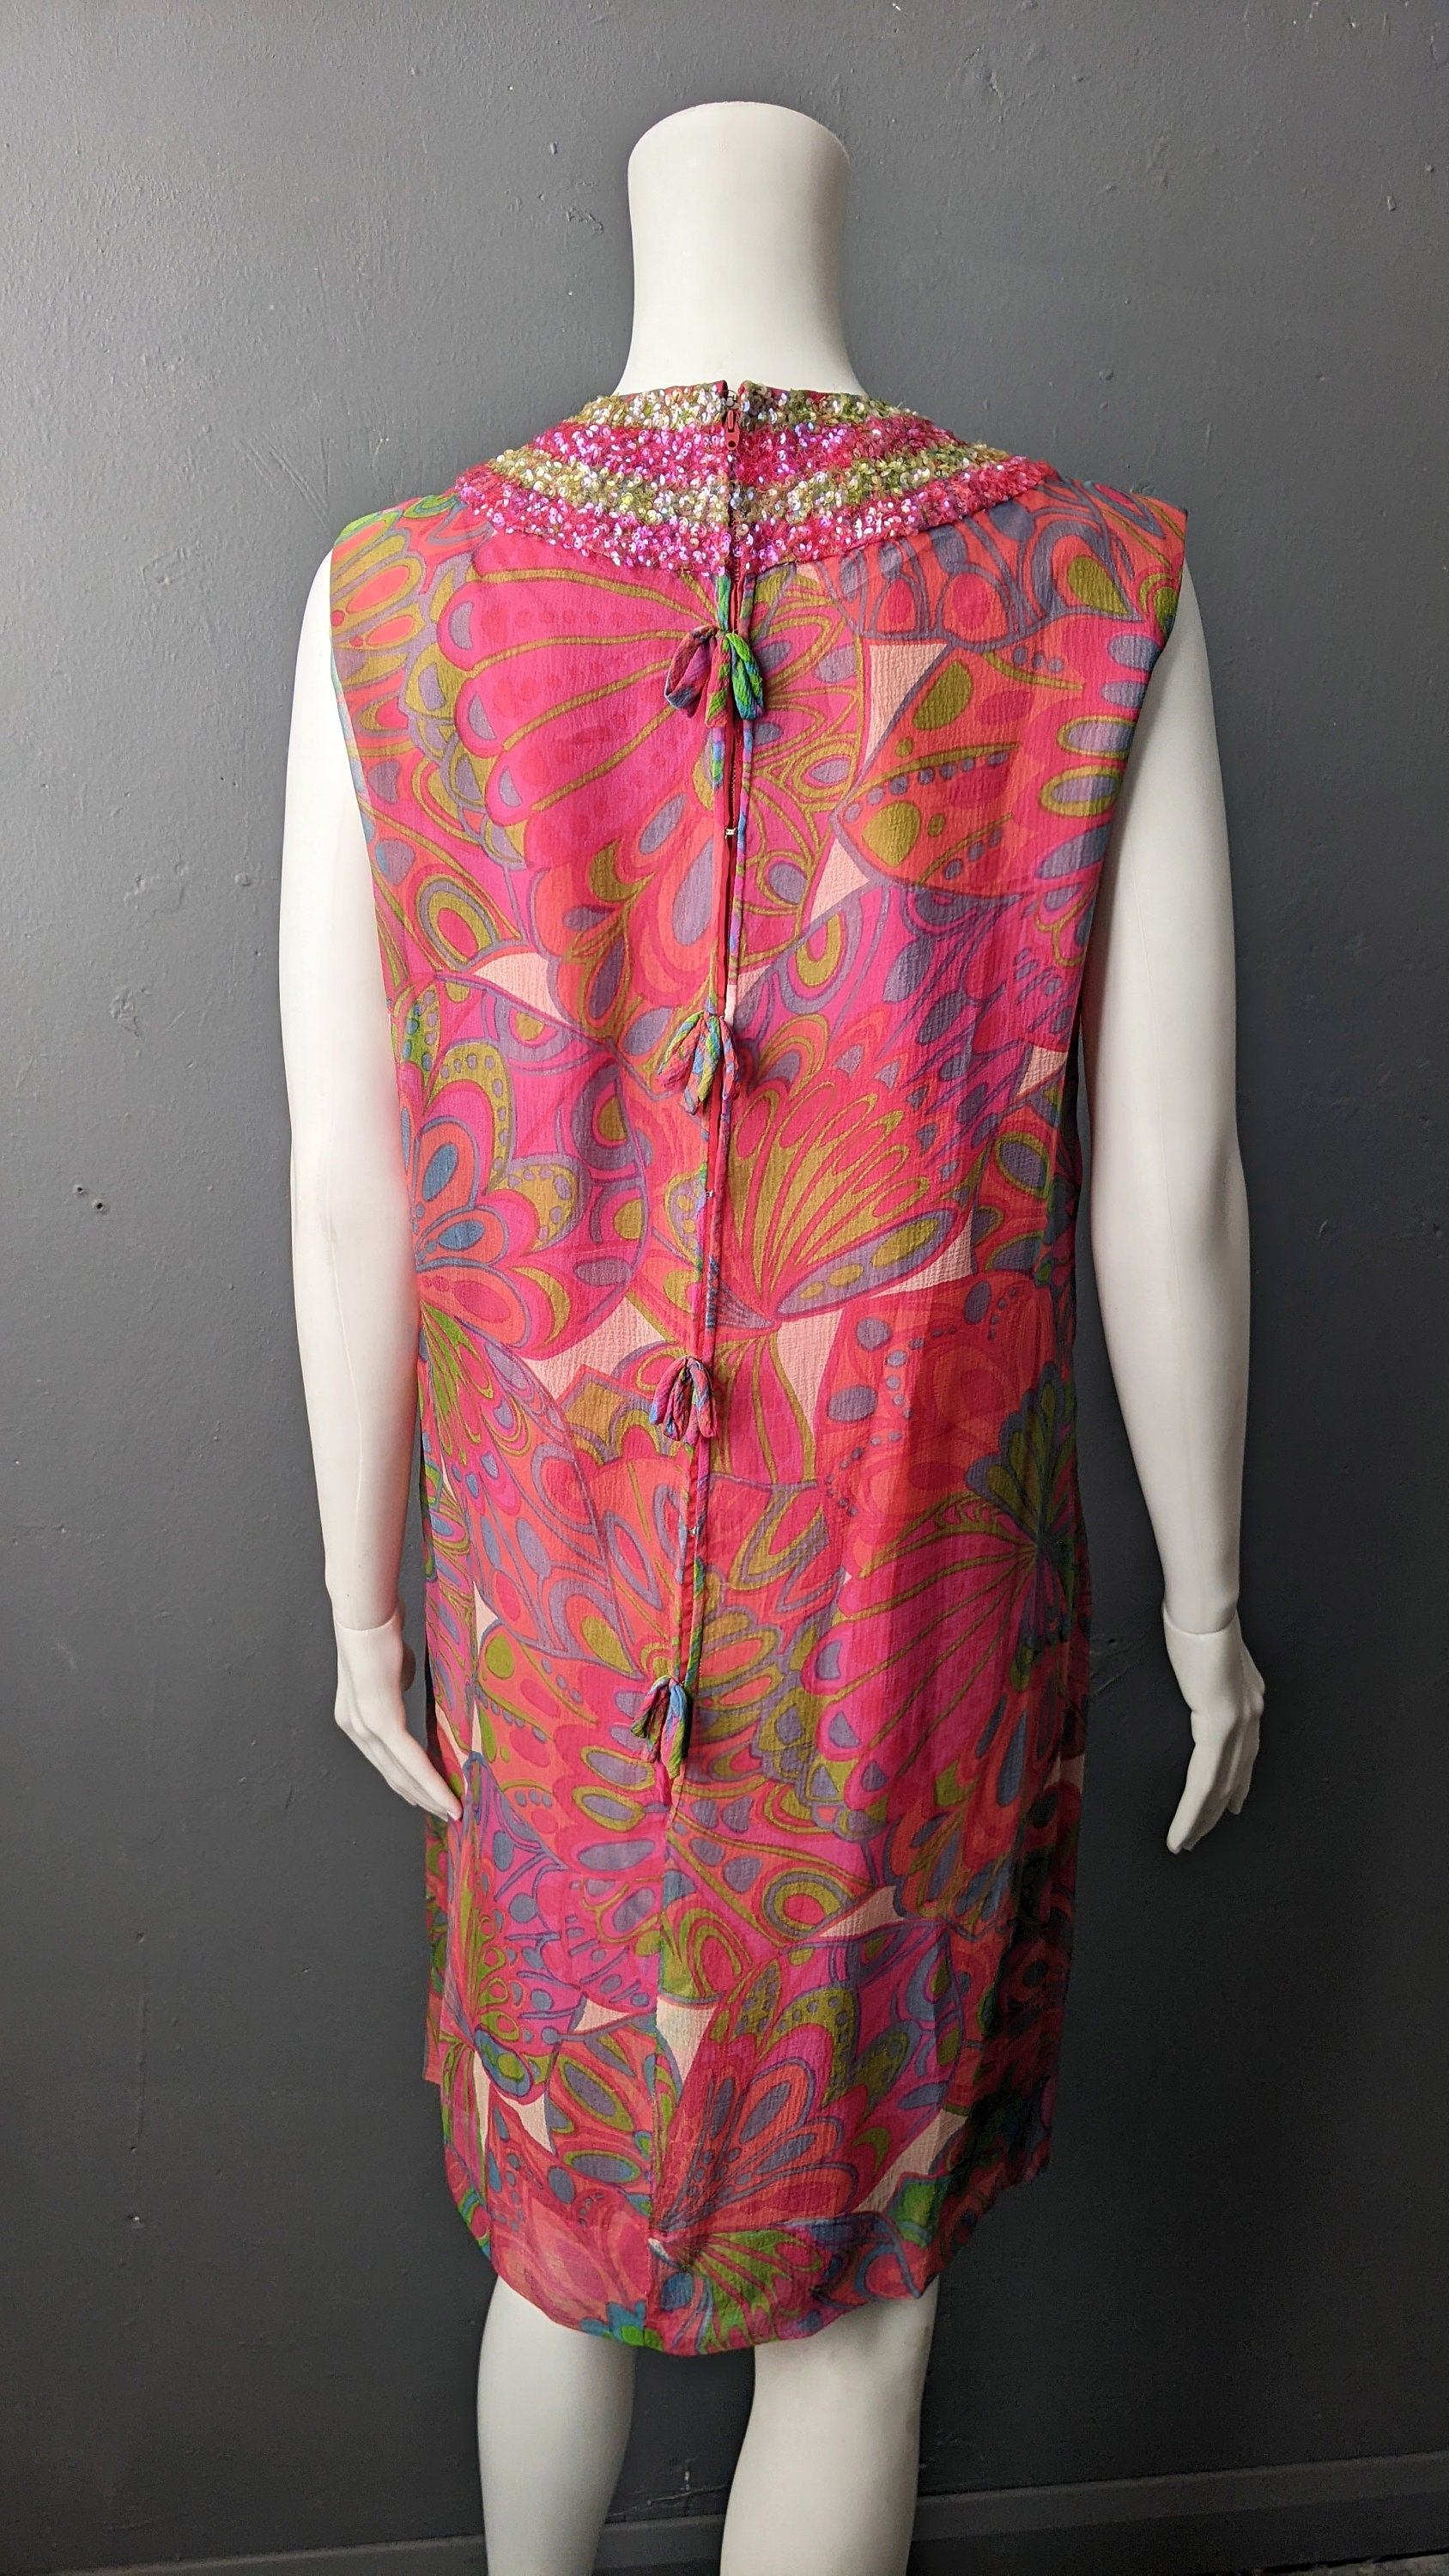 60s Psychedelic Silk Shift Dress with Sequin Collar by Robert Dorland of London, Size Small Medium